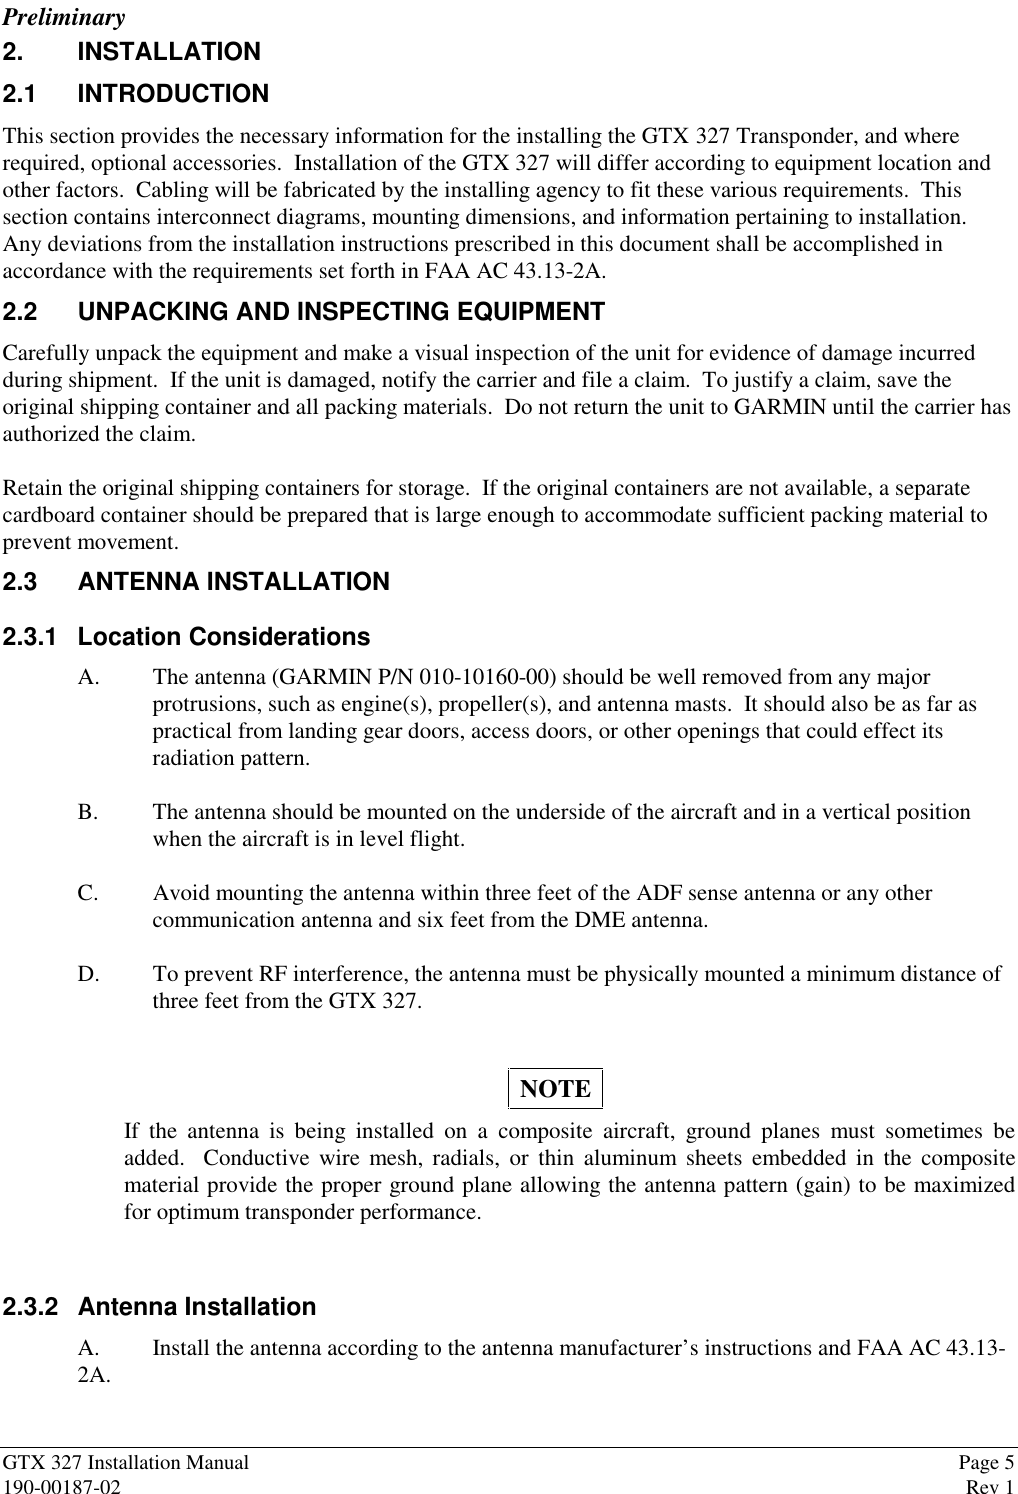 PreliminaryGTX 327 Installation Manual Page 5190-00187-02 Rev 12. INSTALLATION2.1 INTRODUCTIONThis section provides the necessary information for the installing the GTX 327 Transponder, and whererequired, optional accessories.  Installation of the GTX 327 will differ according to equipment location andother factors.  Cabling will be fabricated by the installing agency to fit these various requirements.  Thissection contains interconnect diagrams, mounting dimensions, and information pertaining to installation.Any deviations from the installation instructions prescribed in this document shall be accomplished inaccordance with the requirements set forth in FAA AC 43.13-2A.2.2 UNPACKING AND INSPECTING EQUIPMENTCarefully unpack the equipment and make a visual inspection of the unit for evidence of damage incurredduring shipment.  If the unit is damaged, notify the carrier and file a claim.  To justify a claim, save theoriginal shipping container and all packing materials.  Do not return the unit to GARMIN until the carrier hasauthorized the claim.Retain the original shipping containers for storage.  If the original containers are not available, a separatecardboard container should be prepared that is large enough to accommodate sufficient packing material toprevent movement.2.3 ANTENNA INSTALLATION2.3.1 Location ConsiderationsA. The antenna (GARMIN P/N 010-10160-00) should be well removed from any majorprotrusions, such as engine(s), propeller(s), and antenna masts.  It should also be as far aspractical from landing gear doors, access doors, or other openings that could effect itsradiation pattern.B. The antenna should be mounted on the underside of the aircraft and in a vertical positionwhen the aircraft is in level flight.C. Avoid mounting the antenna within three feet of the ADF sense antenna or any othercommunication antenna and six feet from the DME antenna.D. To prevent RF interference, the antenna must be physically mounted a minimum distance ofthree feet from the GTX 327.NOTEIf the antenna is being installed on a composite aircraft, ground planes must sometimes beadded.  Conductive wire mesh, radials, or thin aluminum sheets embedded in the compositematerial provide the proper ground plane allowing the antenna pattern (gain) to be maximizedfor optimum transponder performance.2.3.2 Antenna InstallationA. Install the antenna according to the antenna manufacturer’s instructions and FAA AC 43.13-2A.